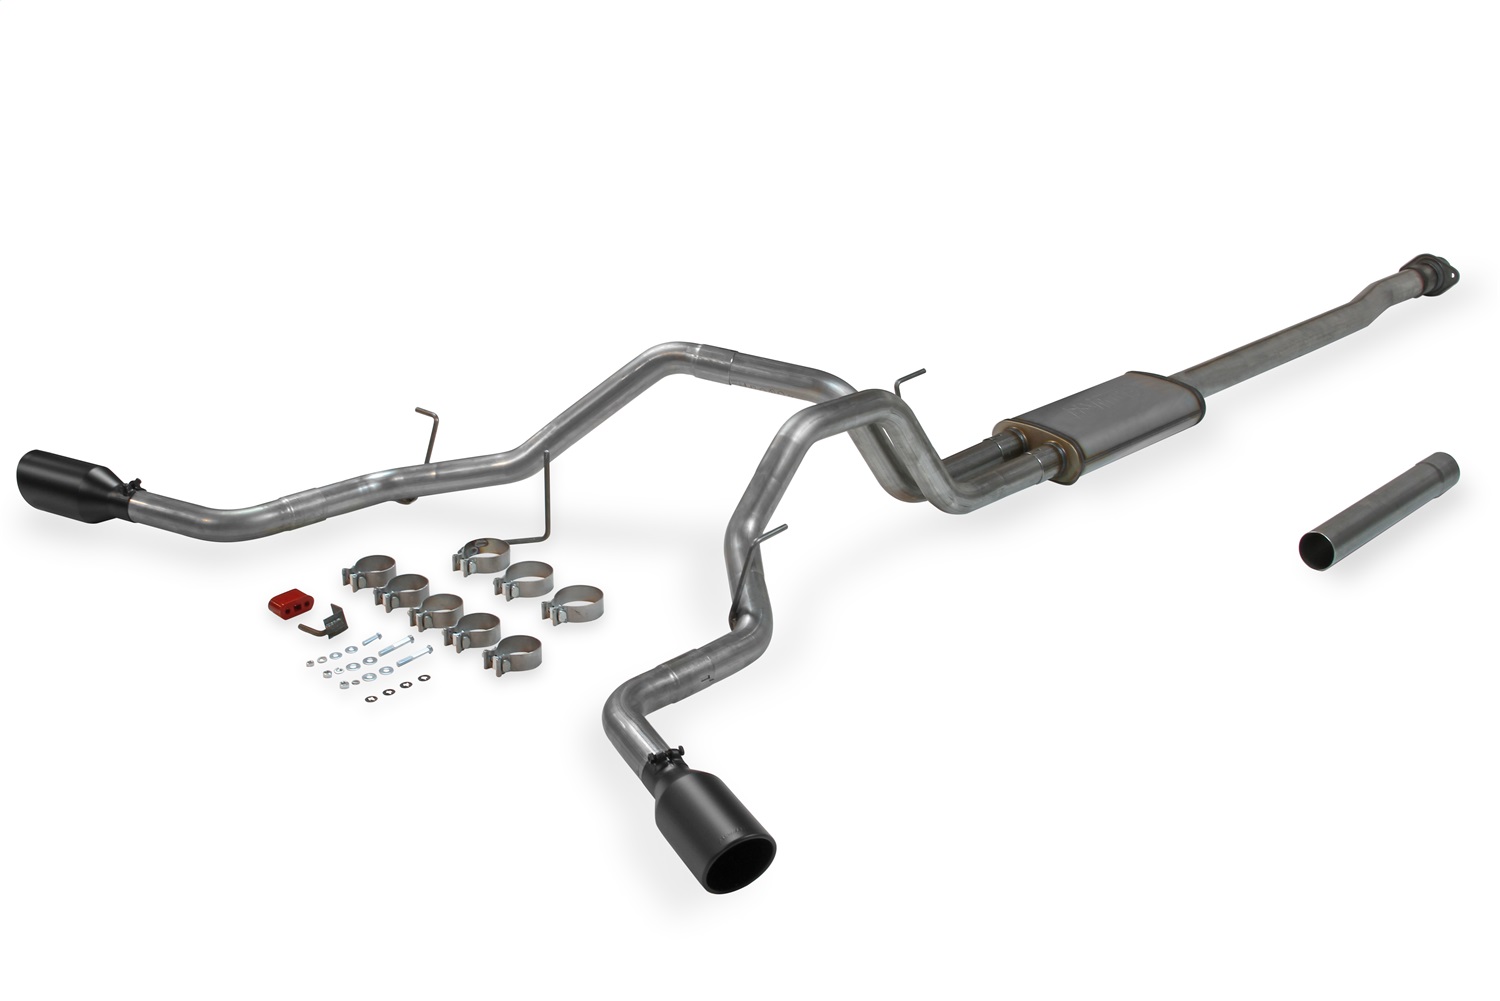 Flowmaster 717872 FlowFX Cat-Back Exhaust System Fits 09-14 F-150